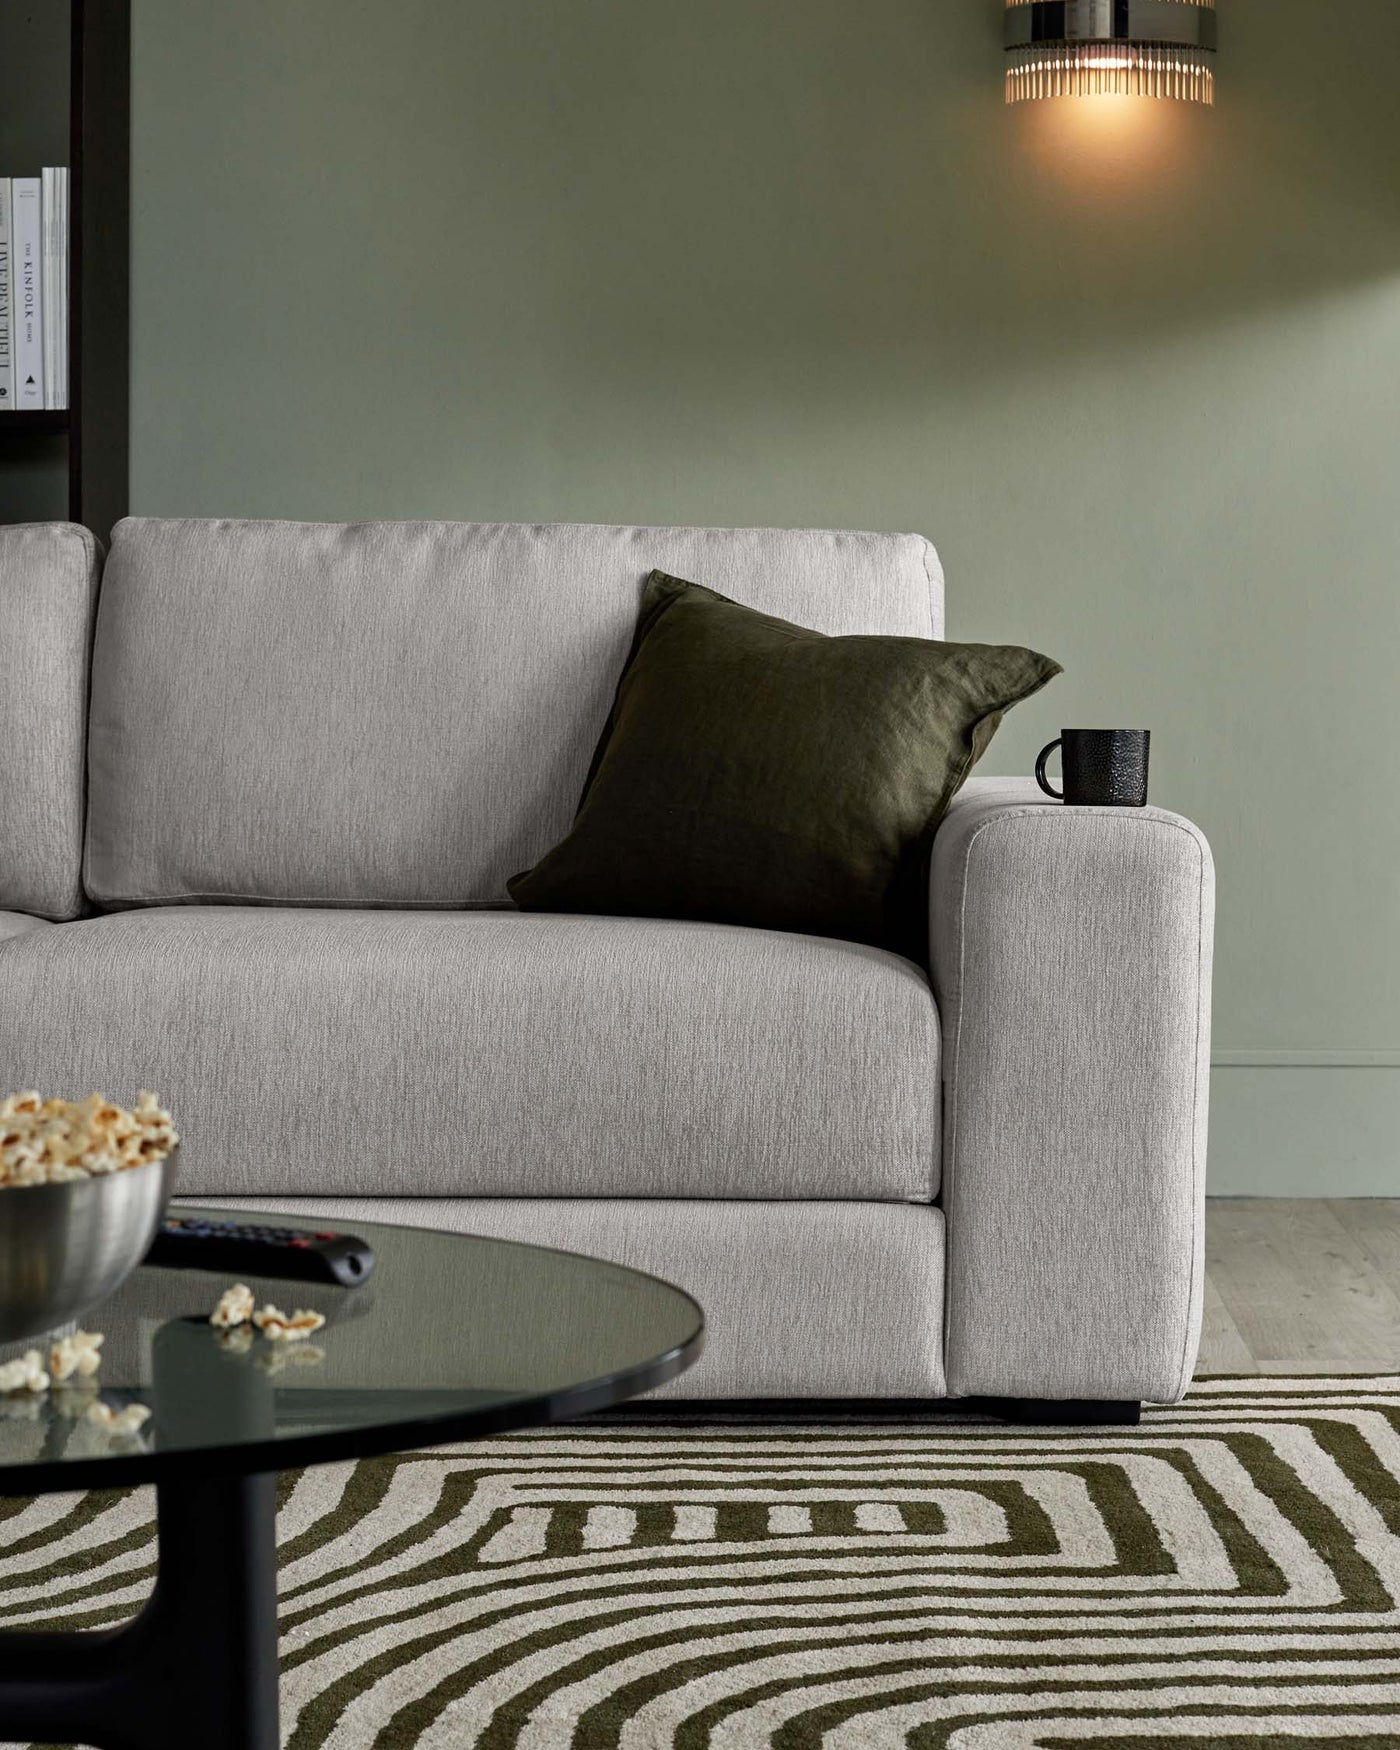 Modern minimalist living room interior featuring a light grey fabric upholstered sofa with clean lines and a plush look, complemented by a dark olive green decorative pillow. In the foreground, there is a round black coffee table with a glass surface showcasing a subtle reflective sheen, holding a metallic bowl of popcorn and a remote control. The flooring is adorned with a patterned area rug in neutral tones, enhancing the sophisticated and contemporary ambiance of the space.